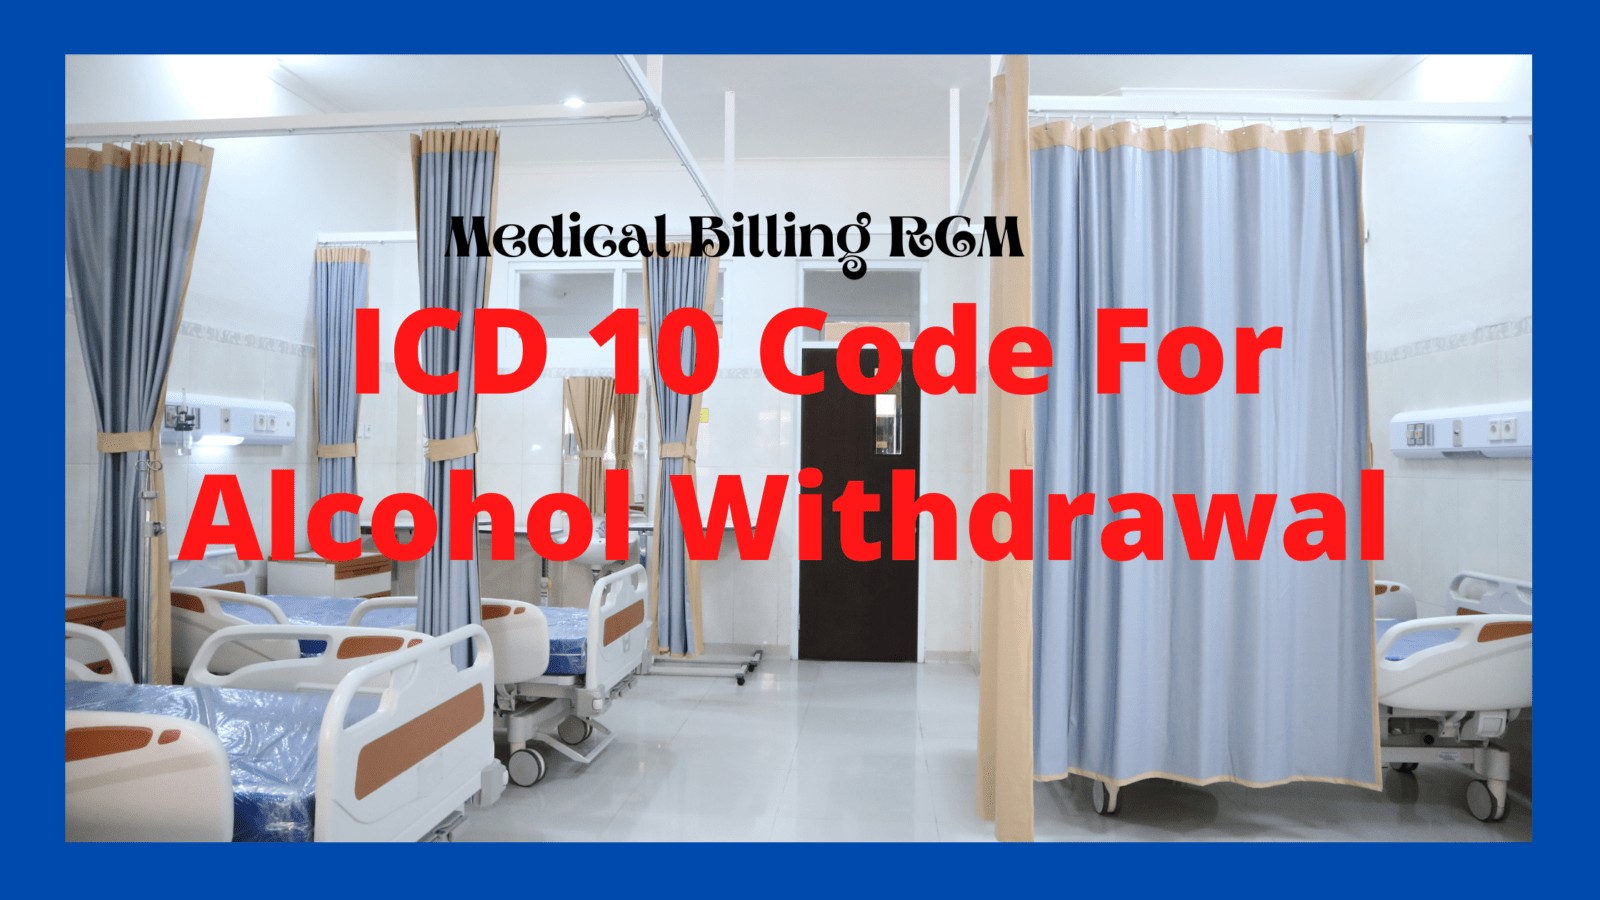 Alcohol withdrwal ICD 10 codes description